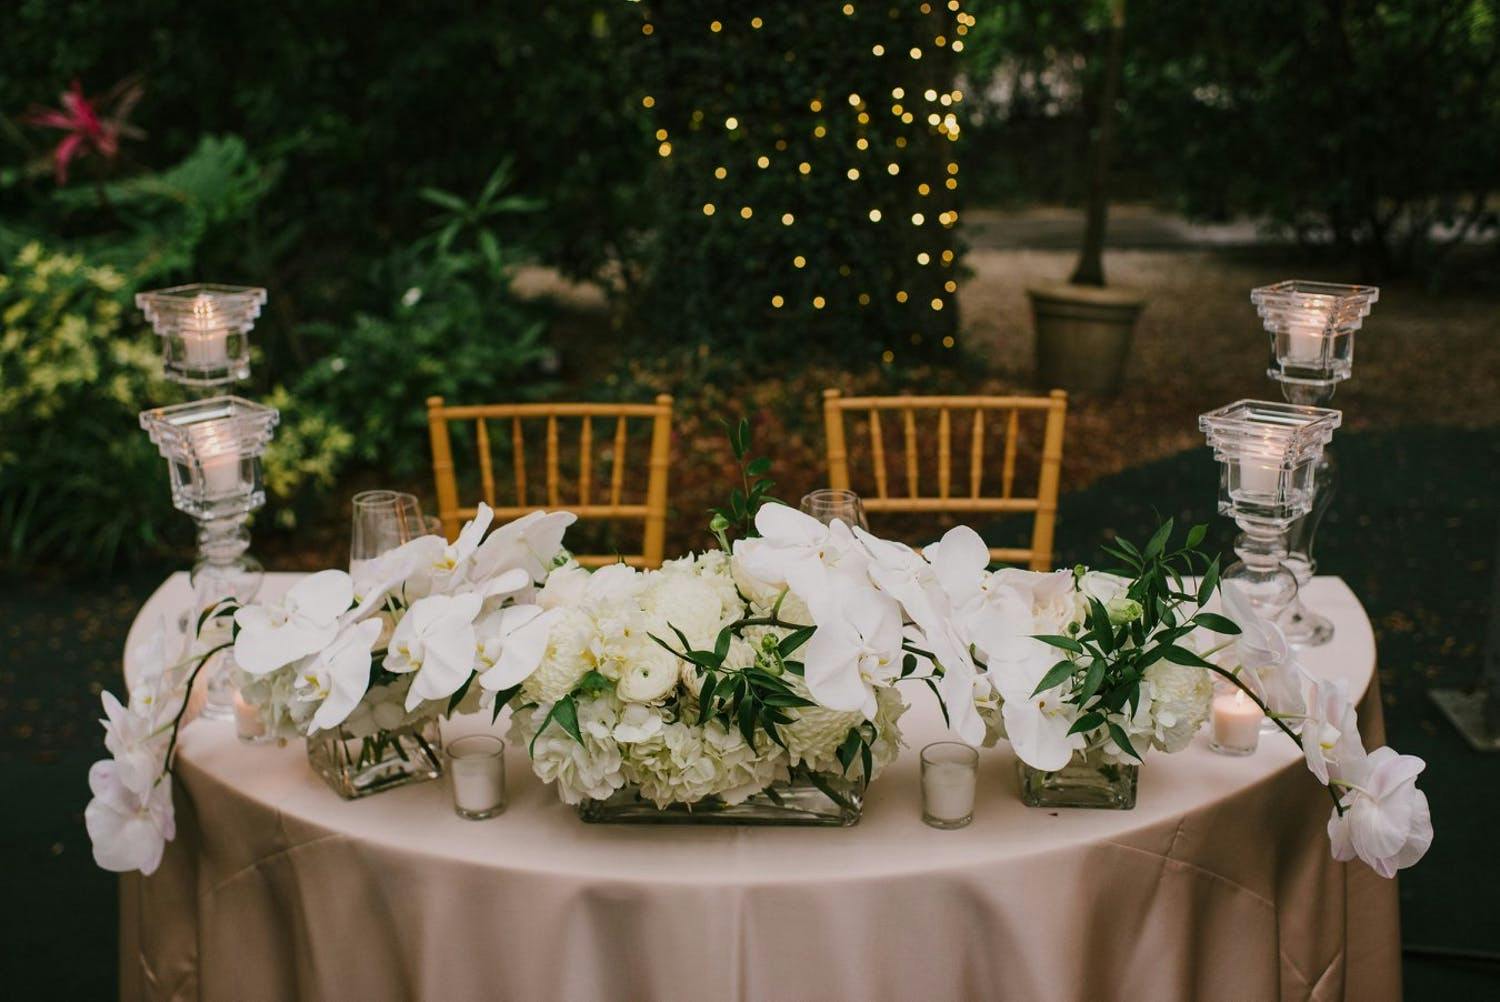 Sweetheart table with pale pink linen, cascading white orchid wedding centerpiece and four glass candle pillars. In the background is greenery and a tree trunk wrapped in string lighting.